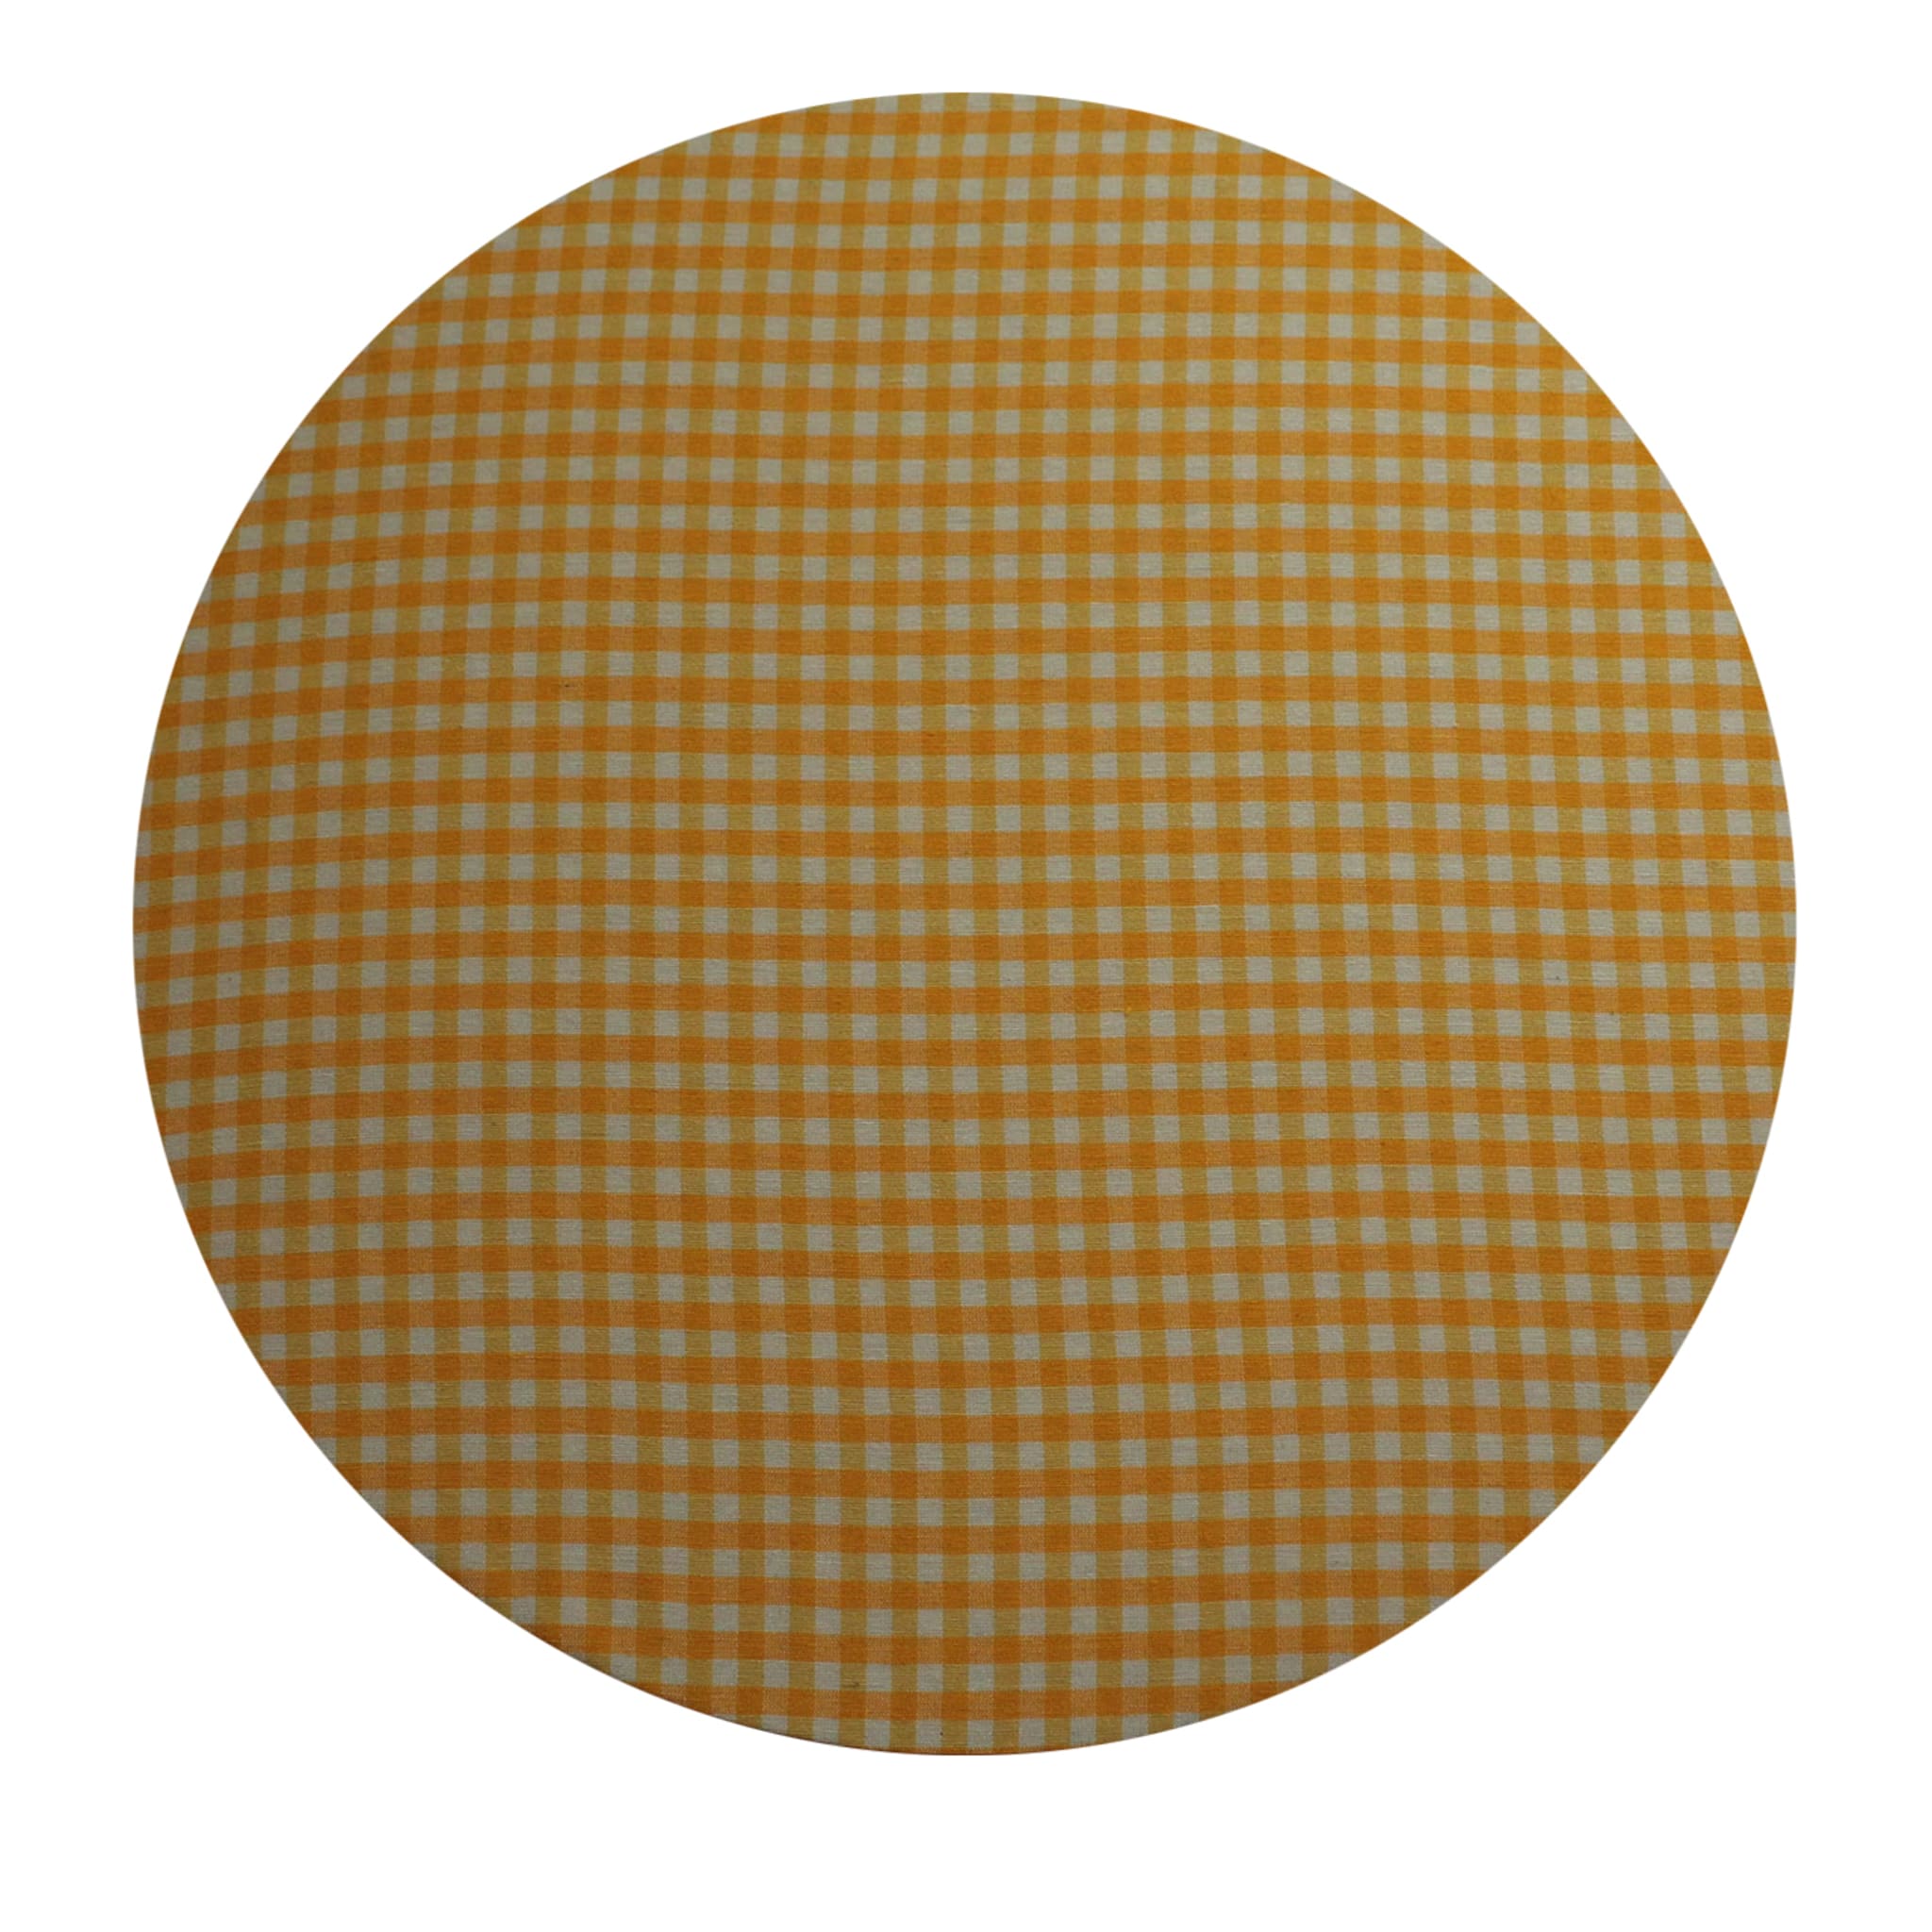 Cuffiette Yellow and White Placemat - Main view